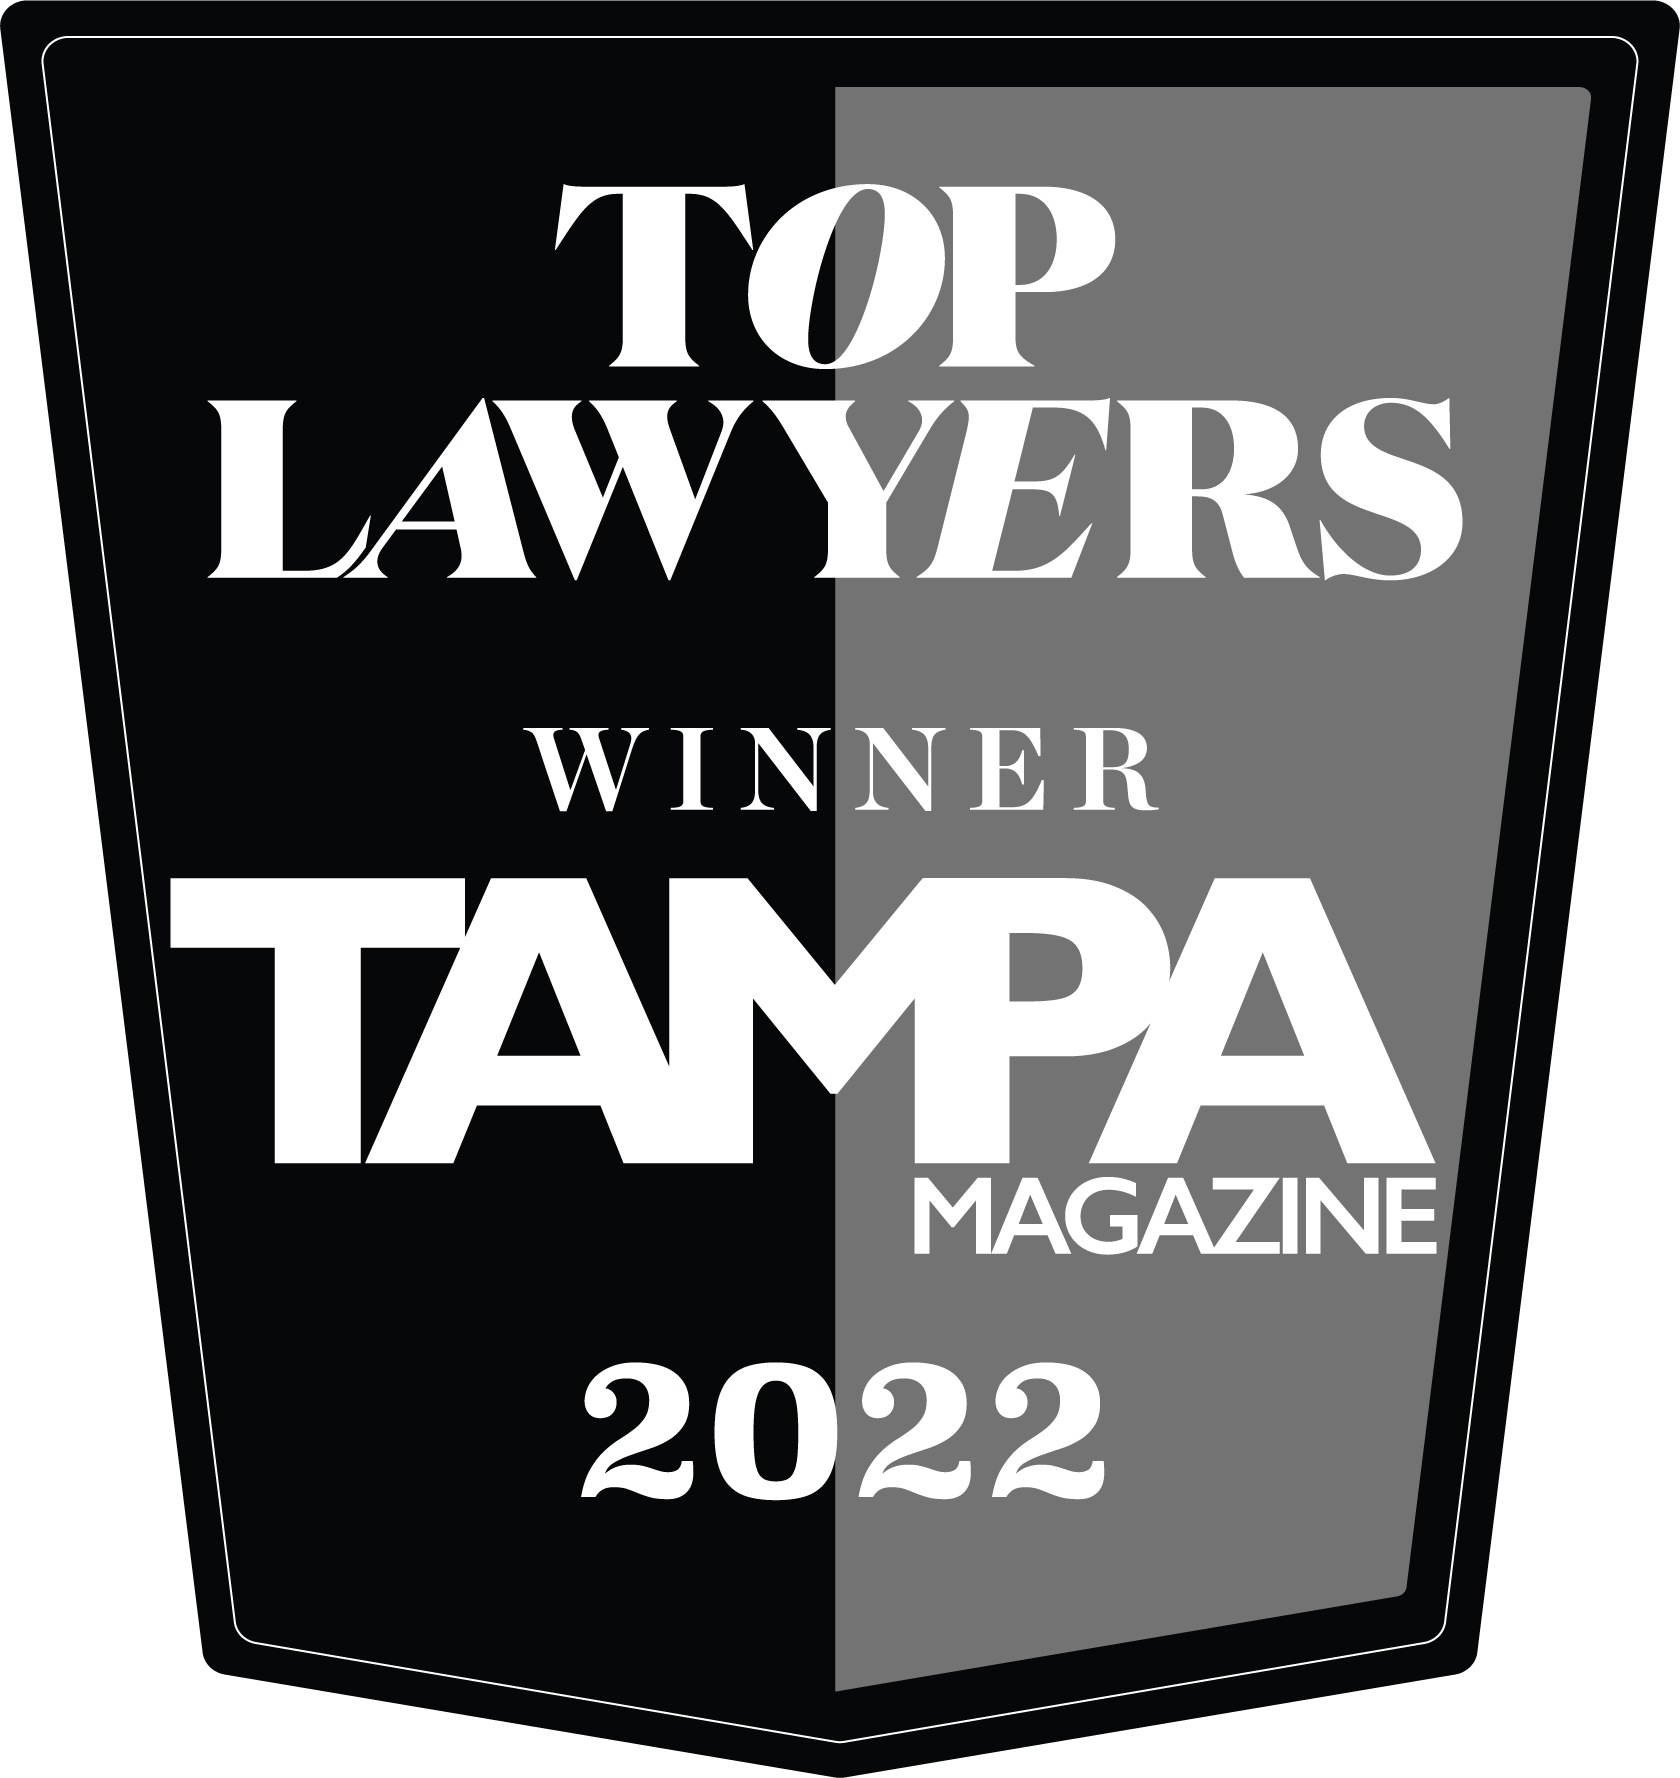 Badge for Top Lawyers Winner Tampa Magazine 2022 for Cynthia Sass Employment Law Individuals 2022